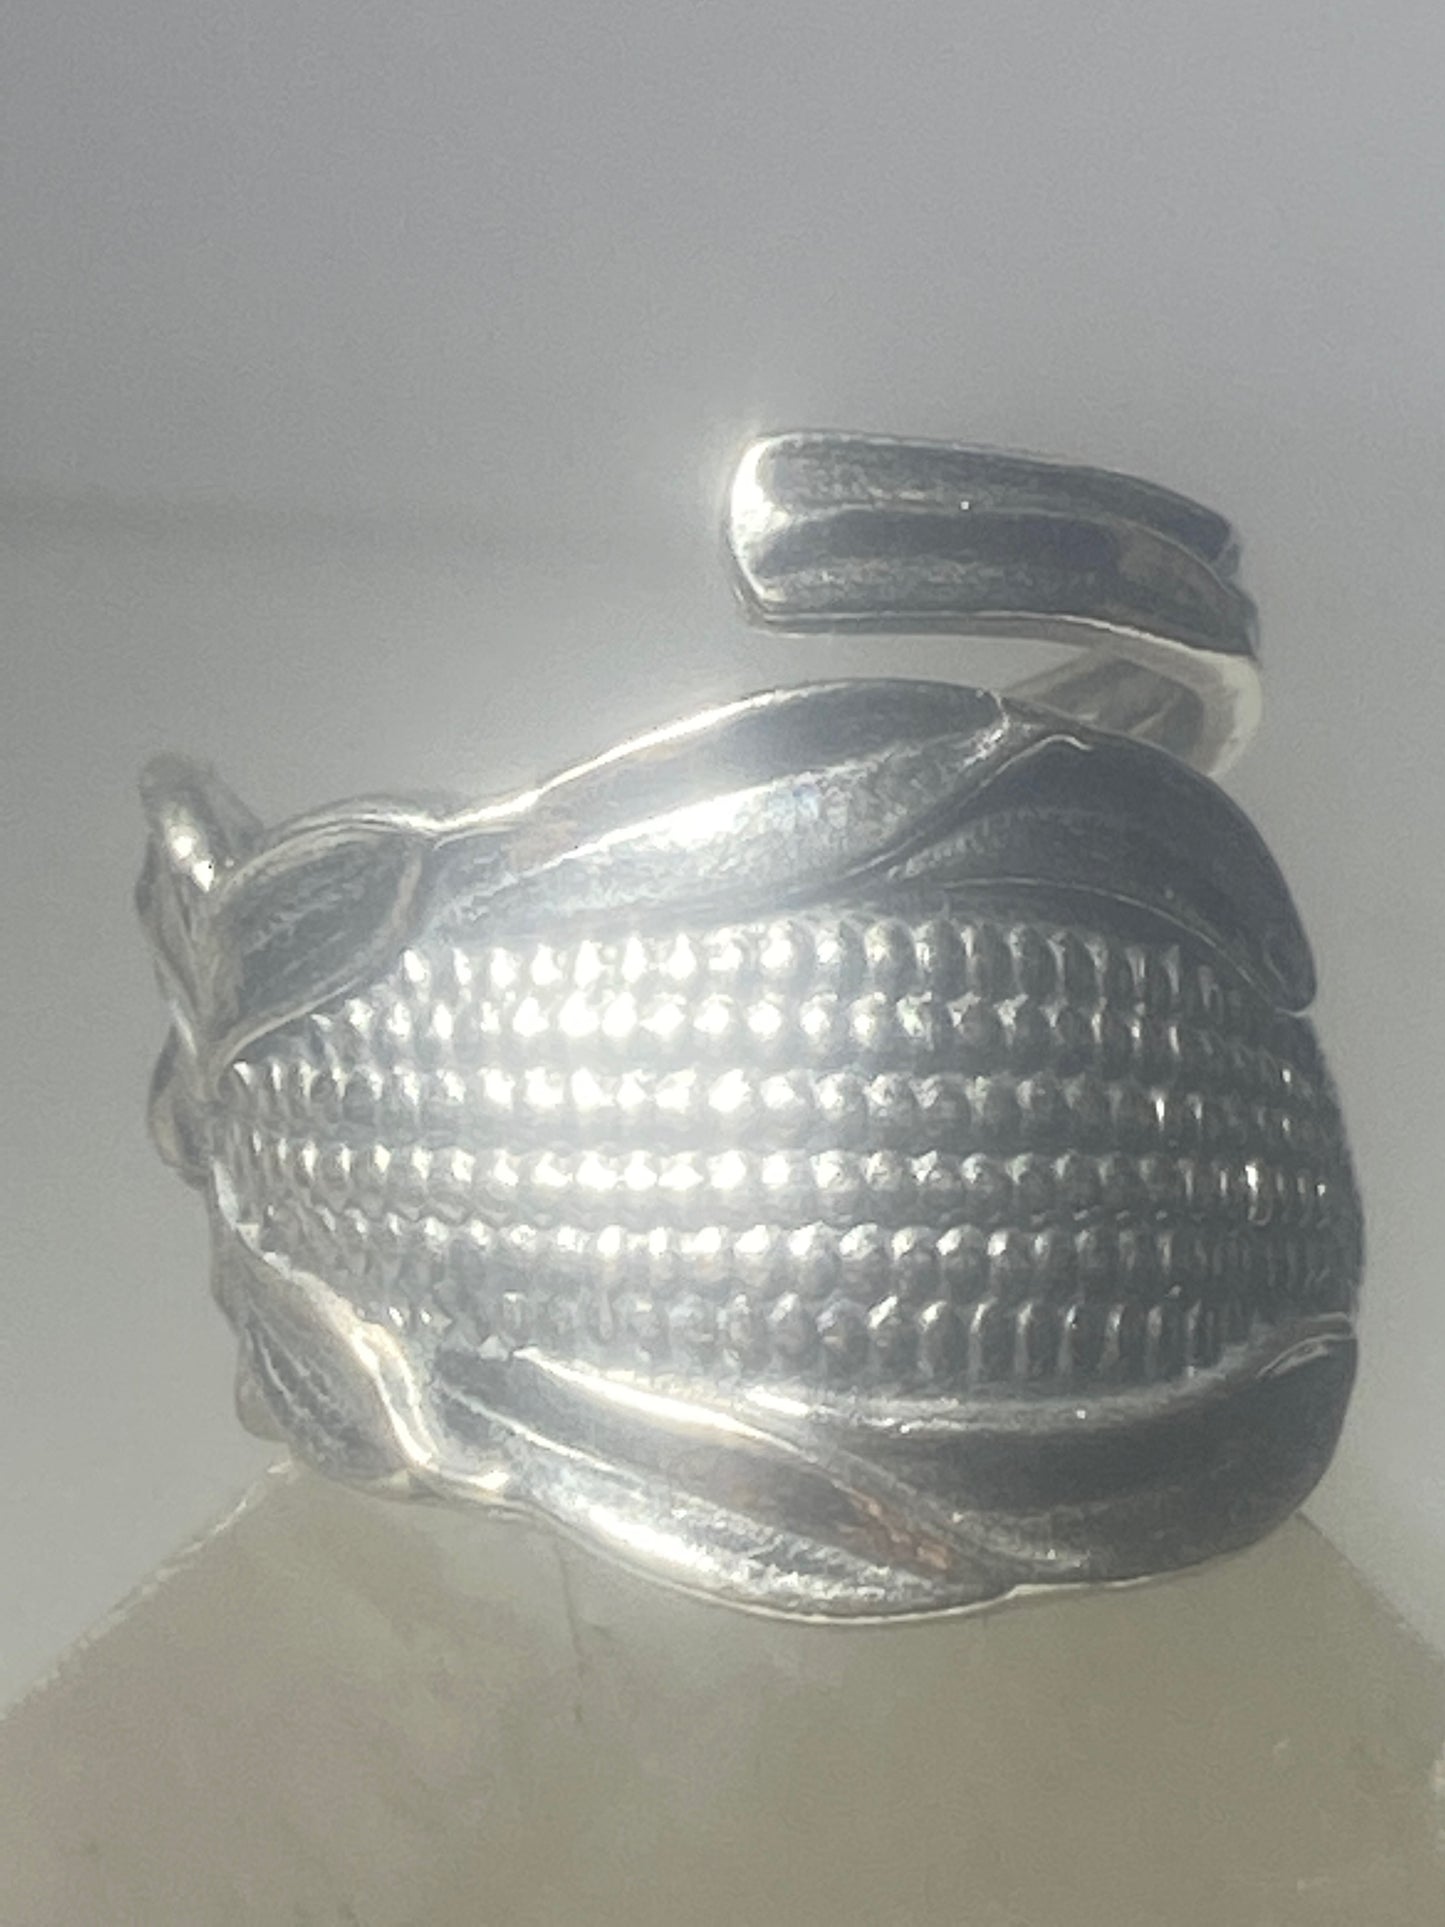 Corn spoon ring southwest  band ring sterling silver women girl